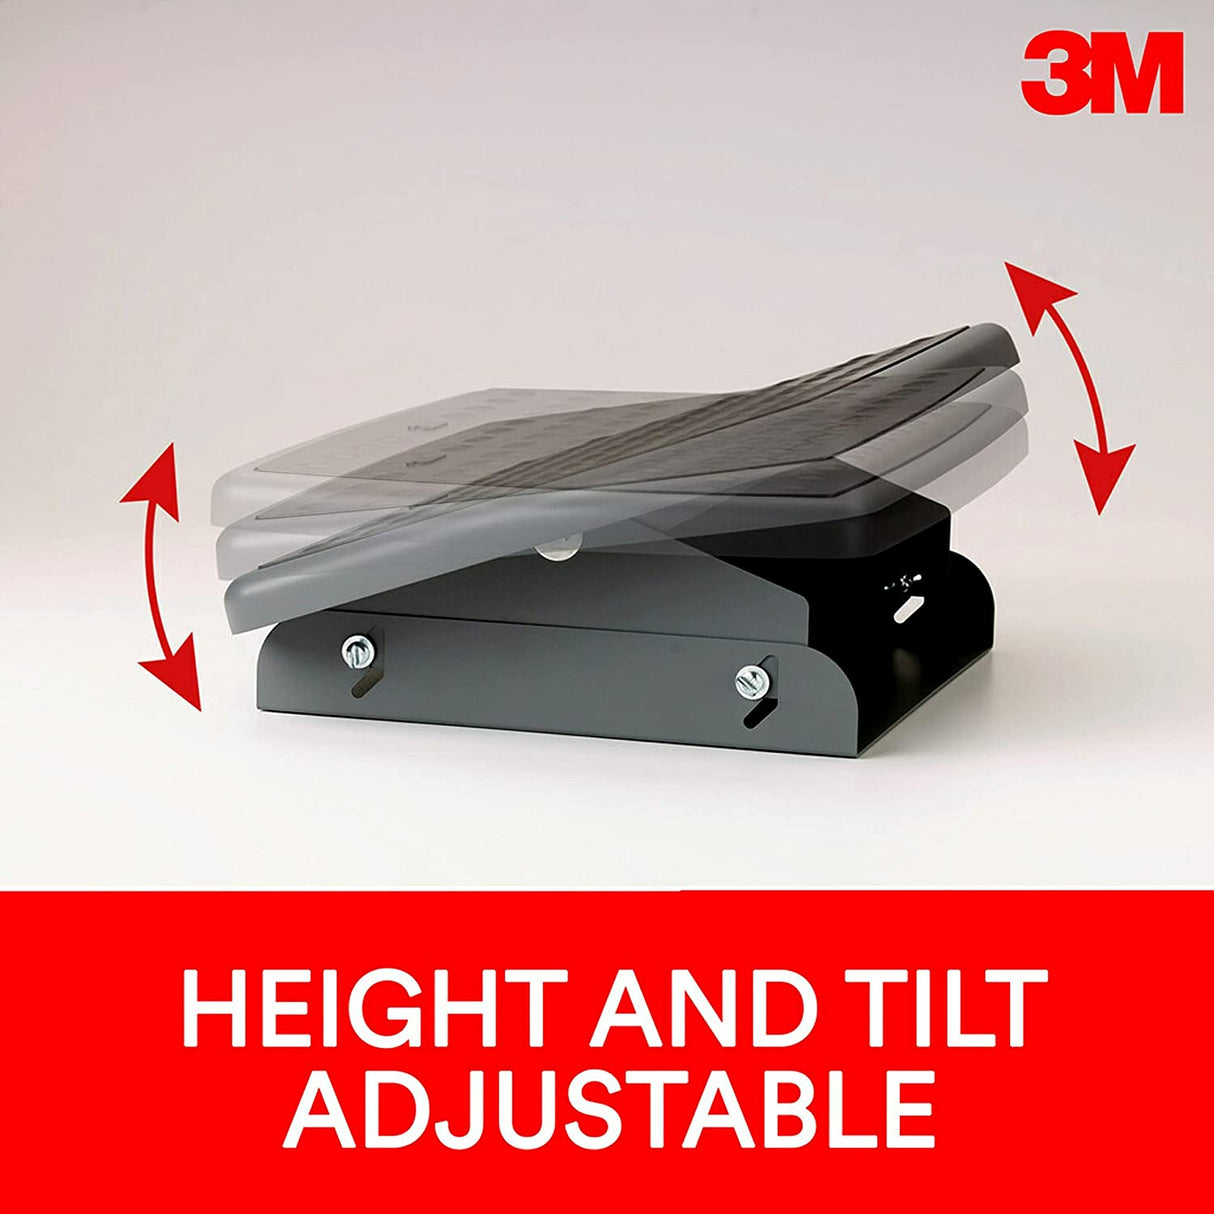 3M Foot Rest, Height and Tilt Adjustable, 22" Extra Wide Platform with Safety-Walk Slip Resistant Surface Provides Ample Room for Both Feet, Heavy Duty Steel Construction, Charcoal Gray (FR530CB) - Dealtargets.com